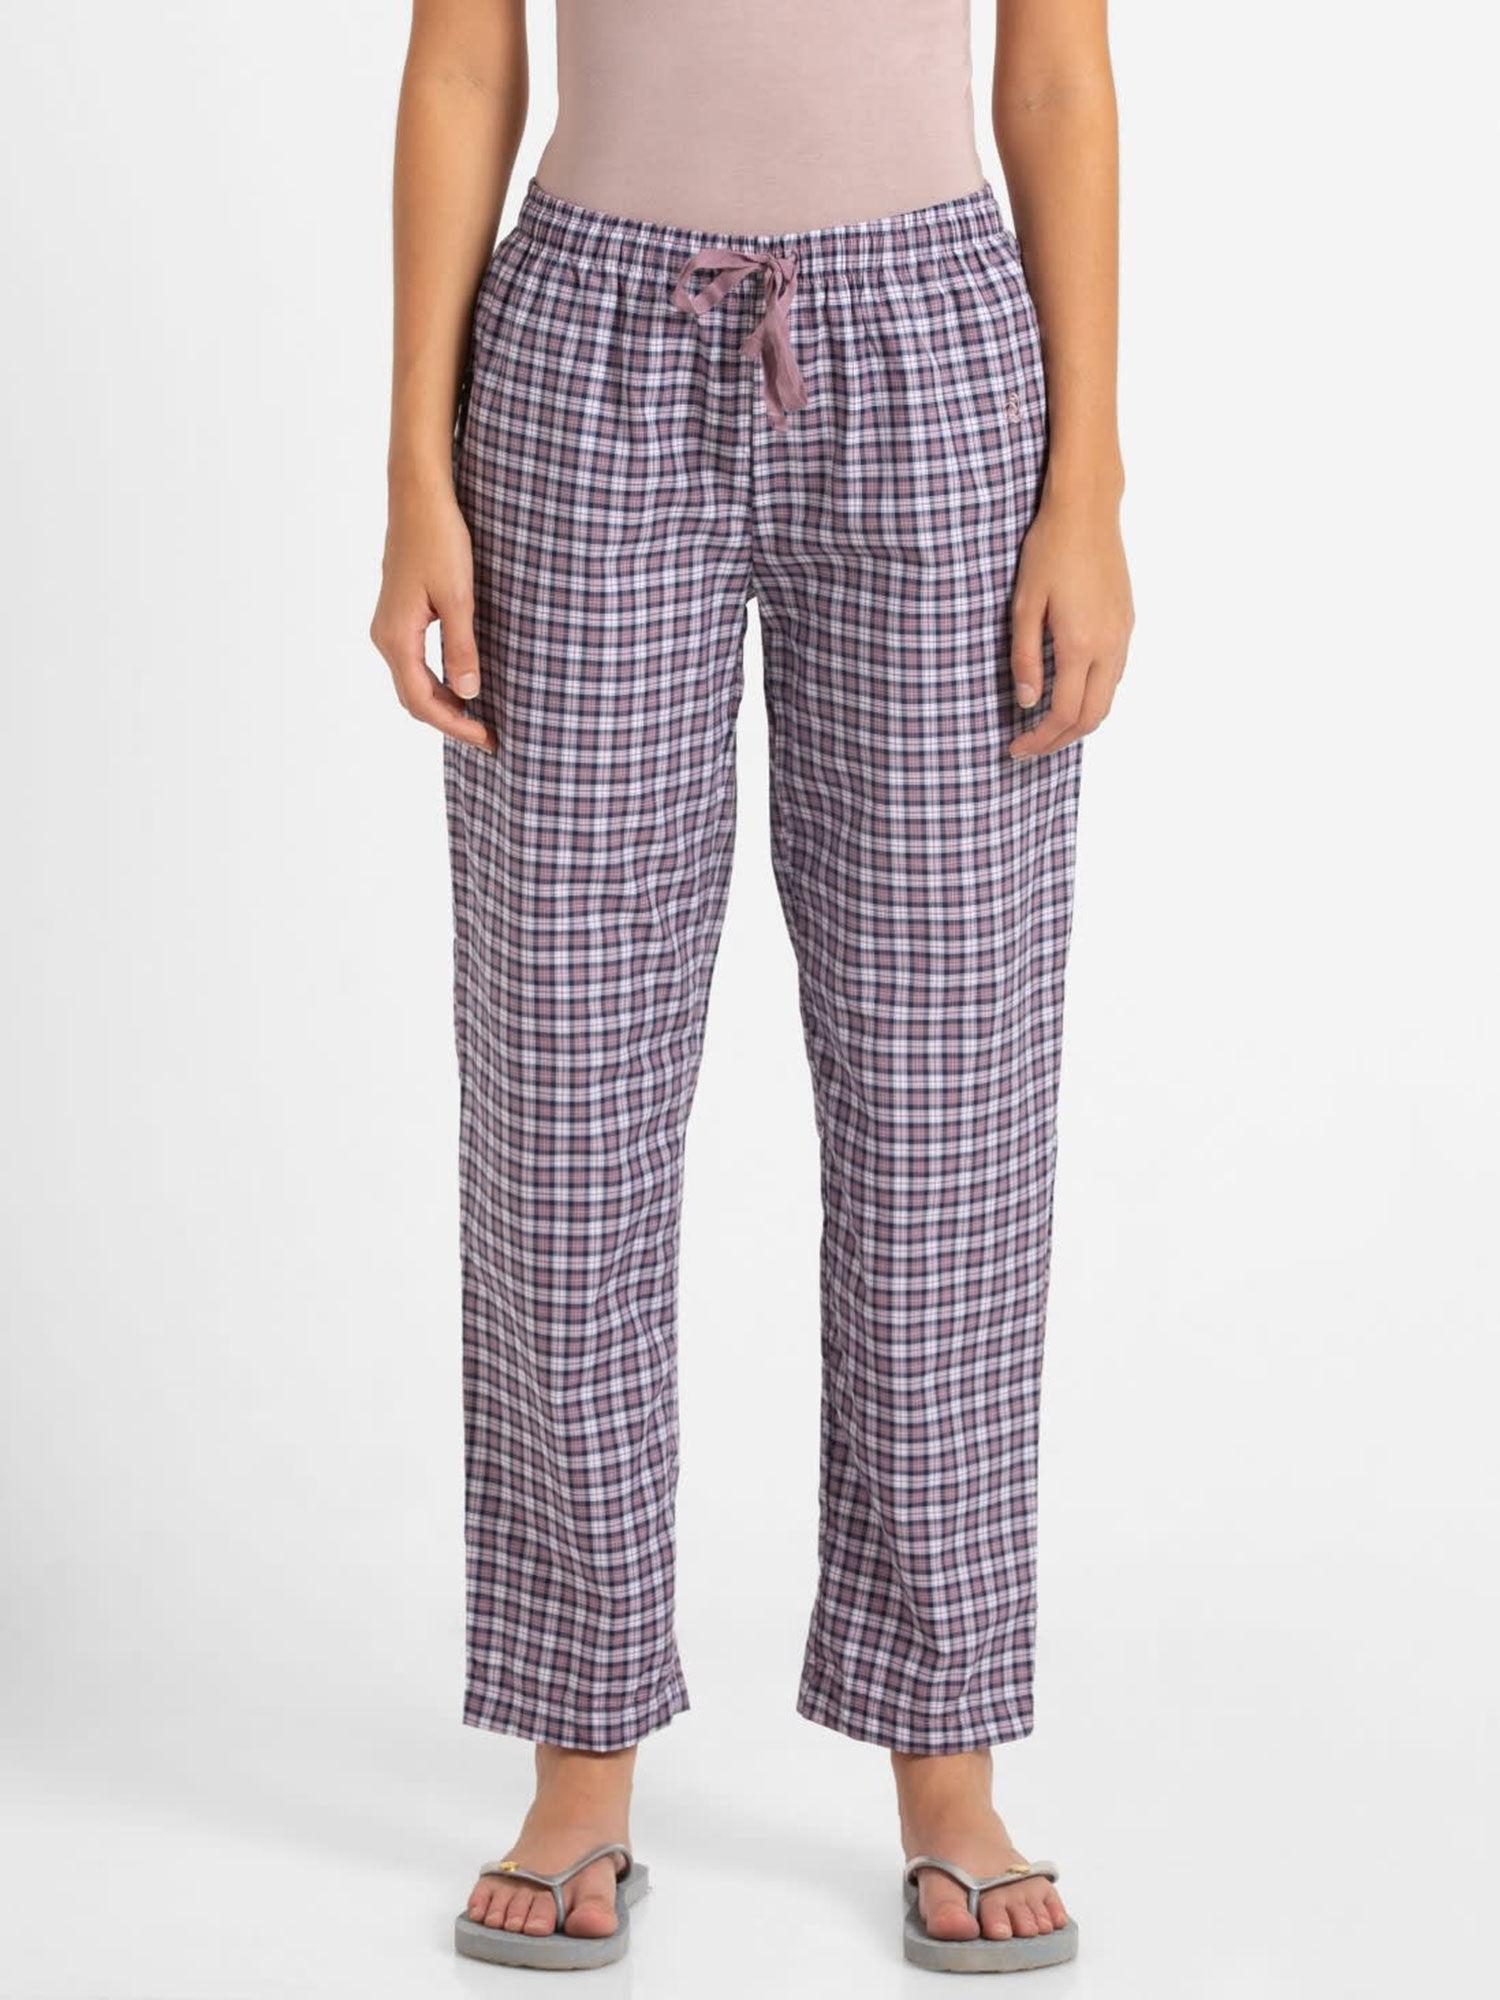 old rose assorted checks long pant : style number - rx06